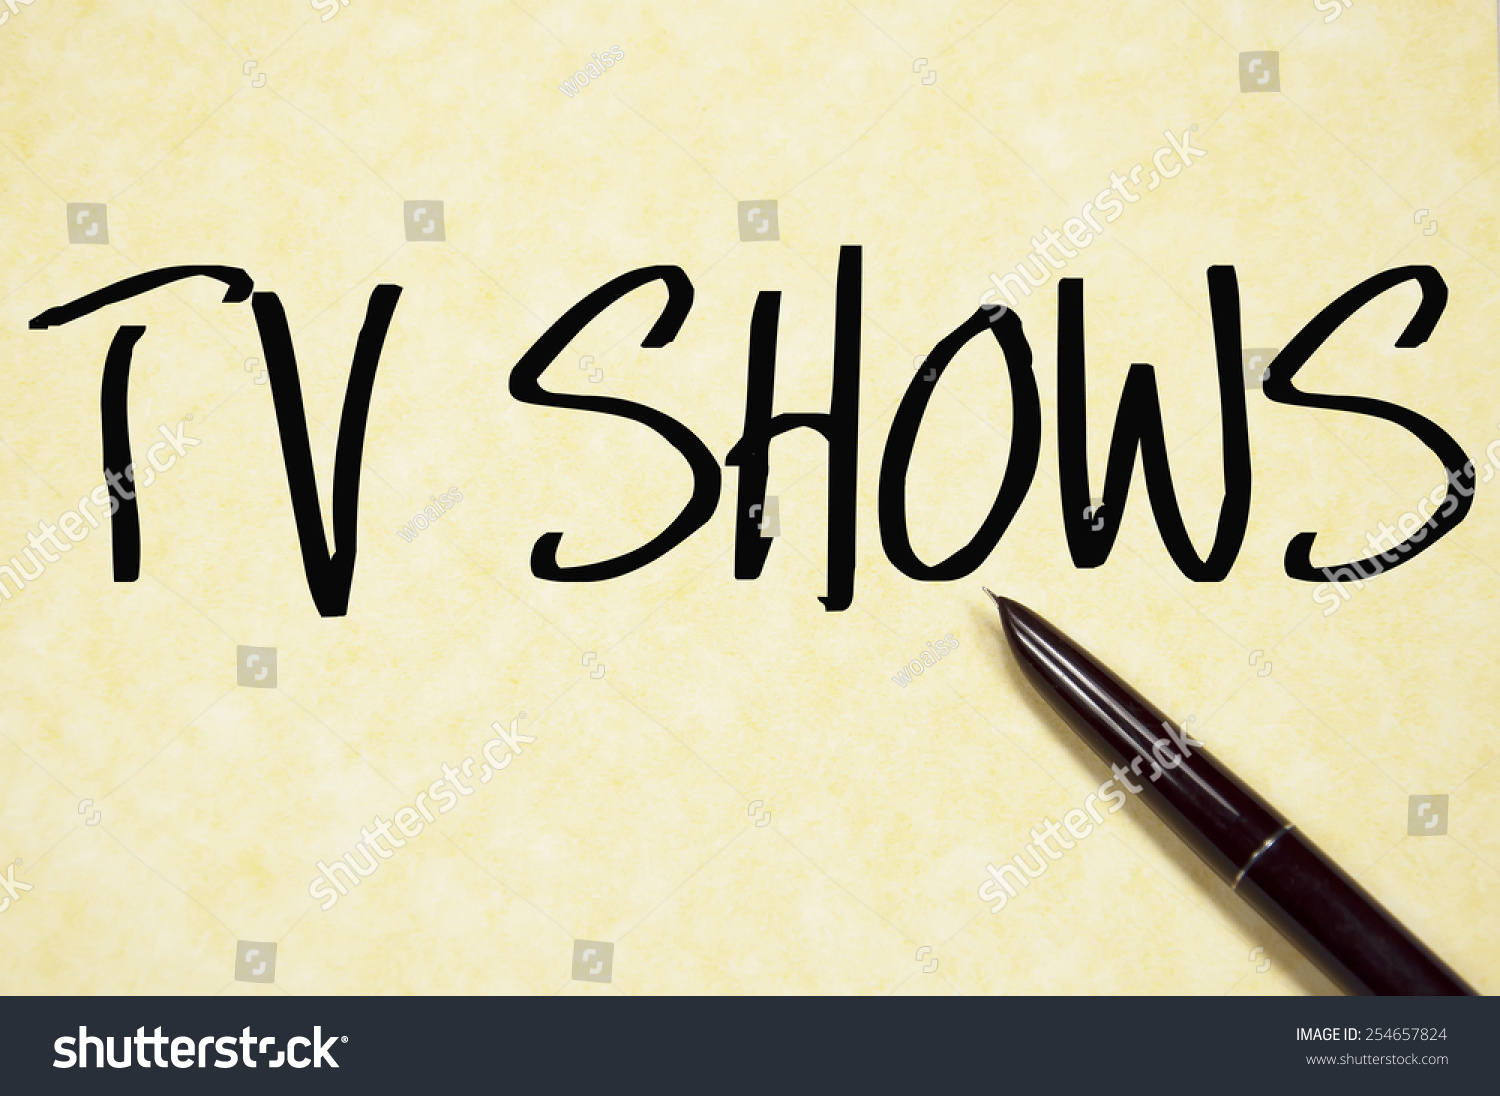 Tv Shows Text Write On Paper Stock Photo (Edit Now) 29